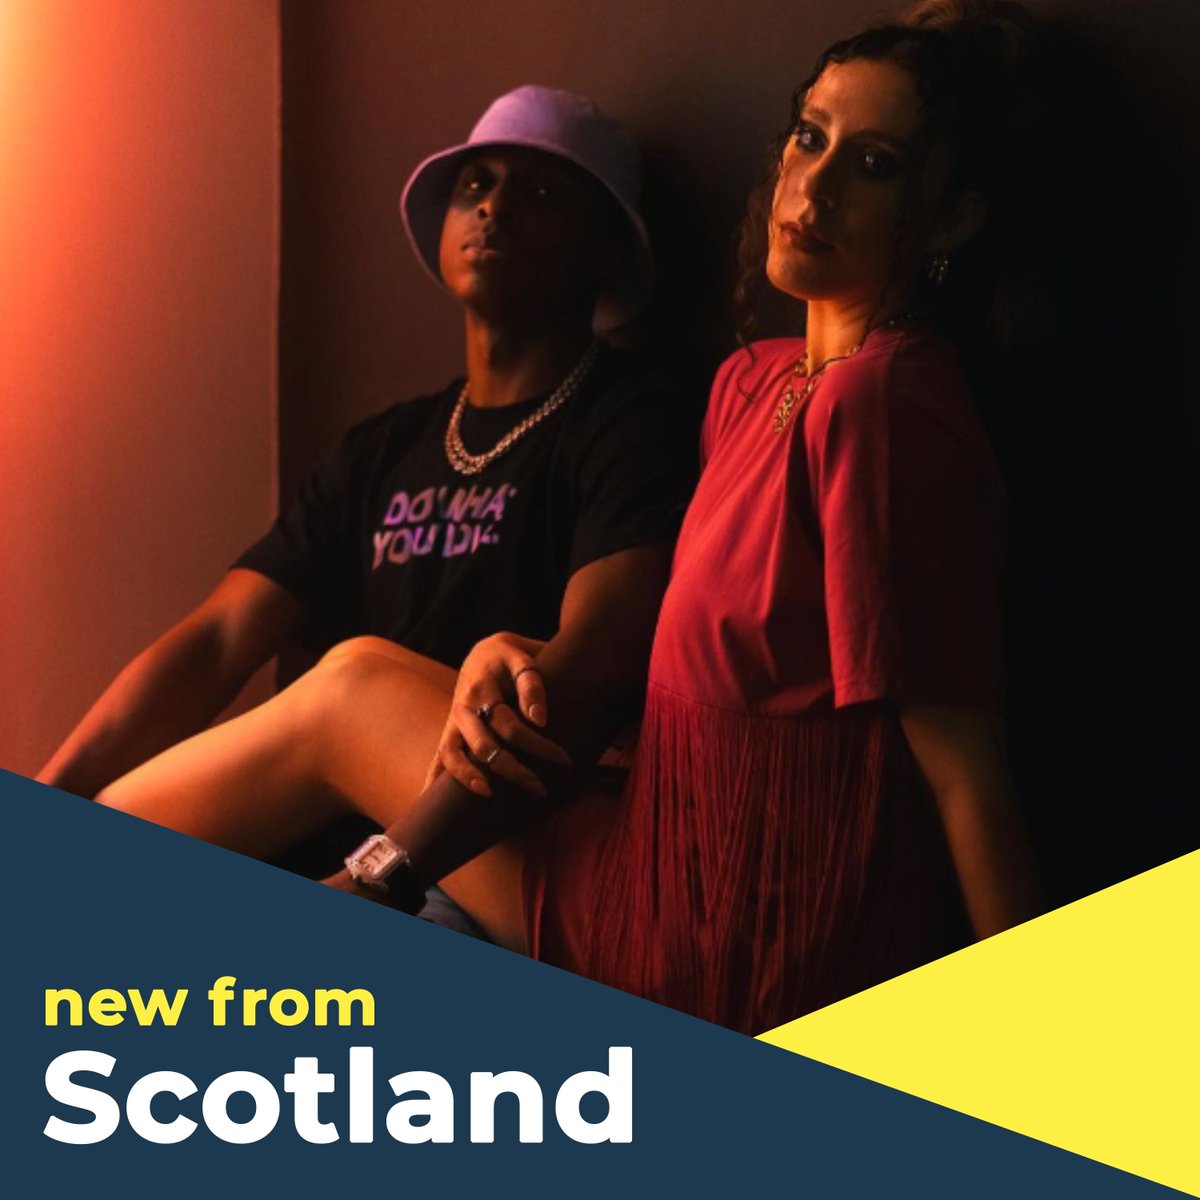 We've updated our New From Scotland playlist with the latest tunes from around Scotland! ✨ Check out new releases from @thisischef1 & @itskatherinealy, @NickyLipp, @majestypalmband, @humour_music and more! Listen here 👉 wide.ink/NewScot